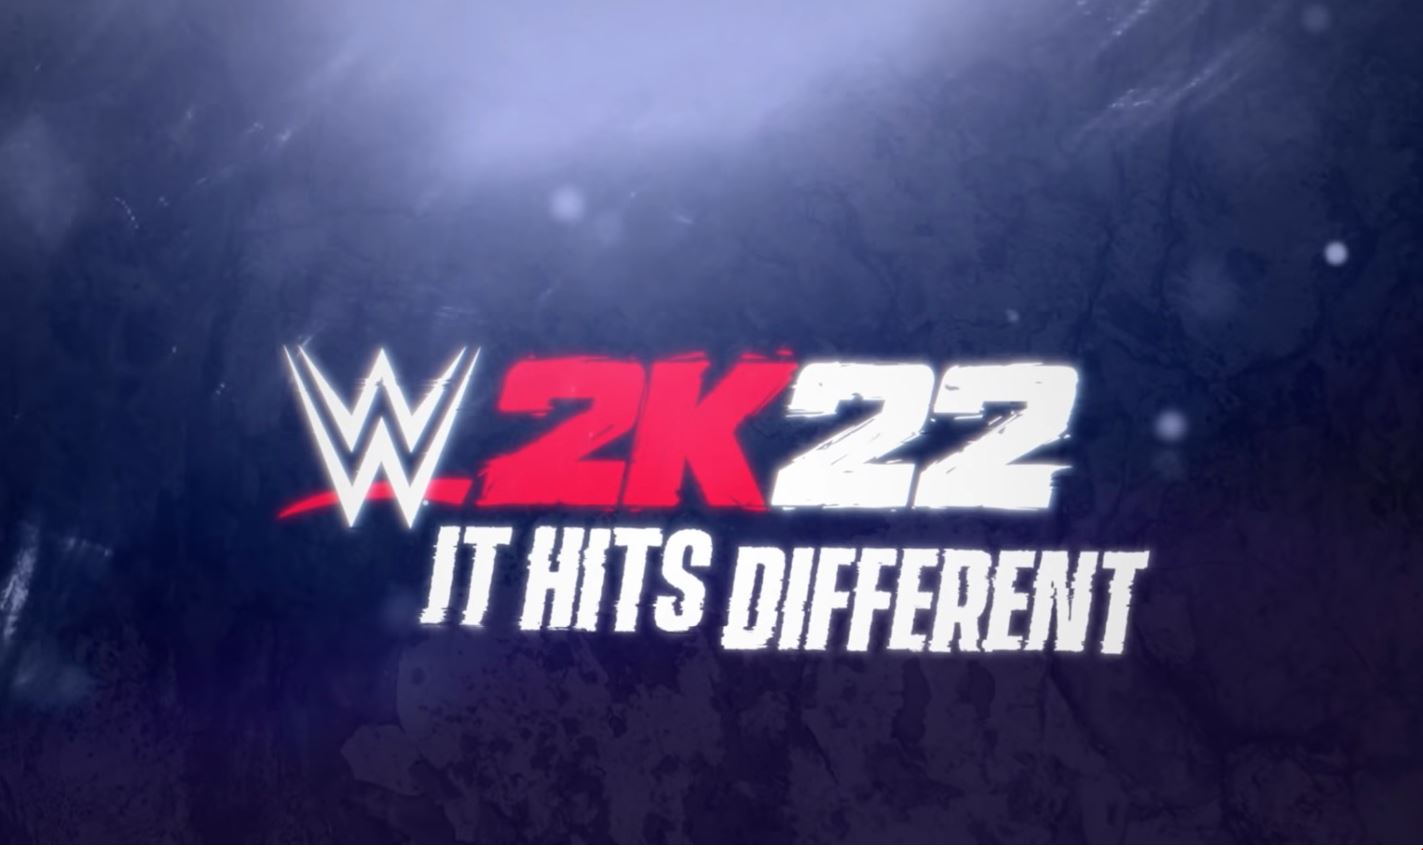 Wwe 2k22 Delayed Until March 22 More Information To Be Out In January The Teal Mango